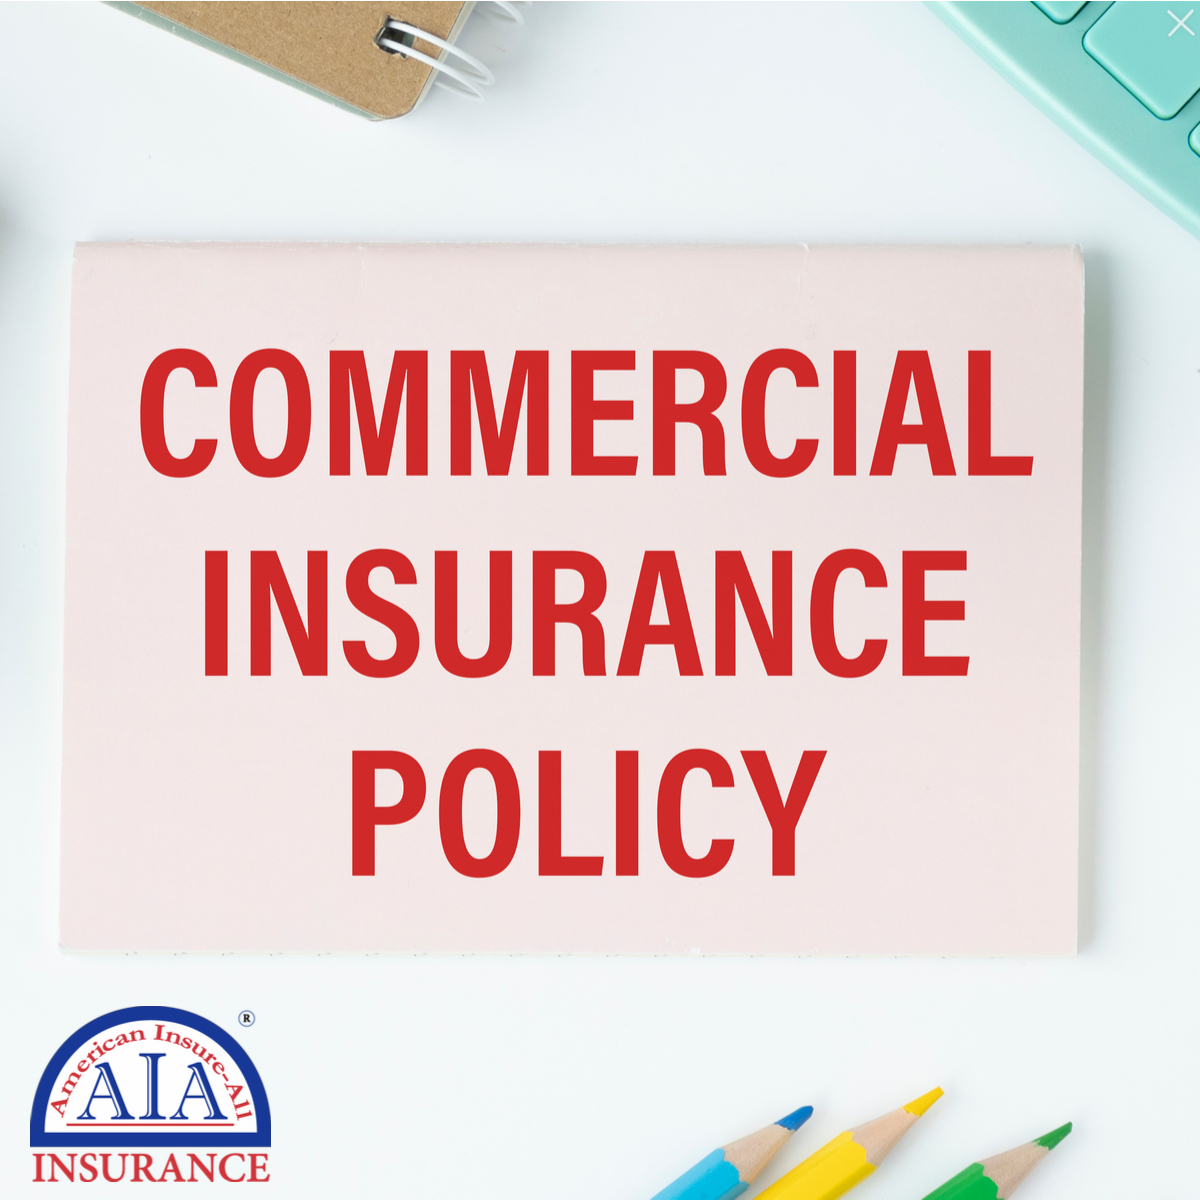 Is Commercial Insurance Available to Small Business Owners or Startups?